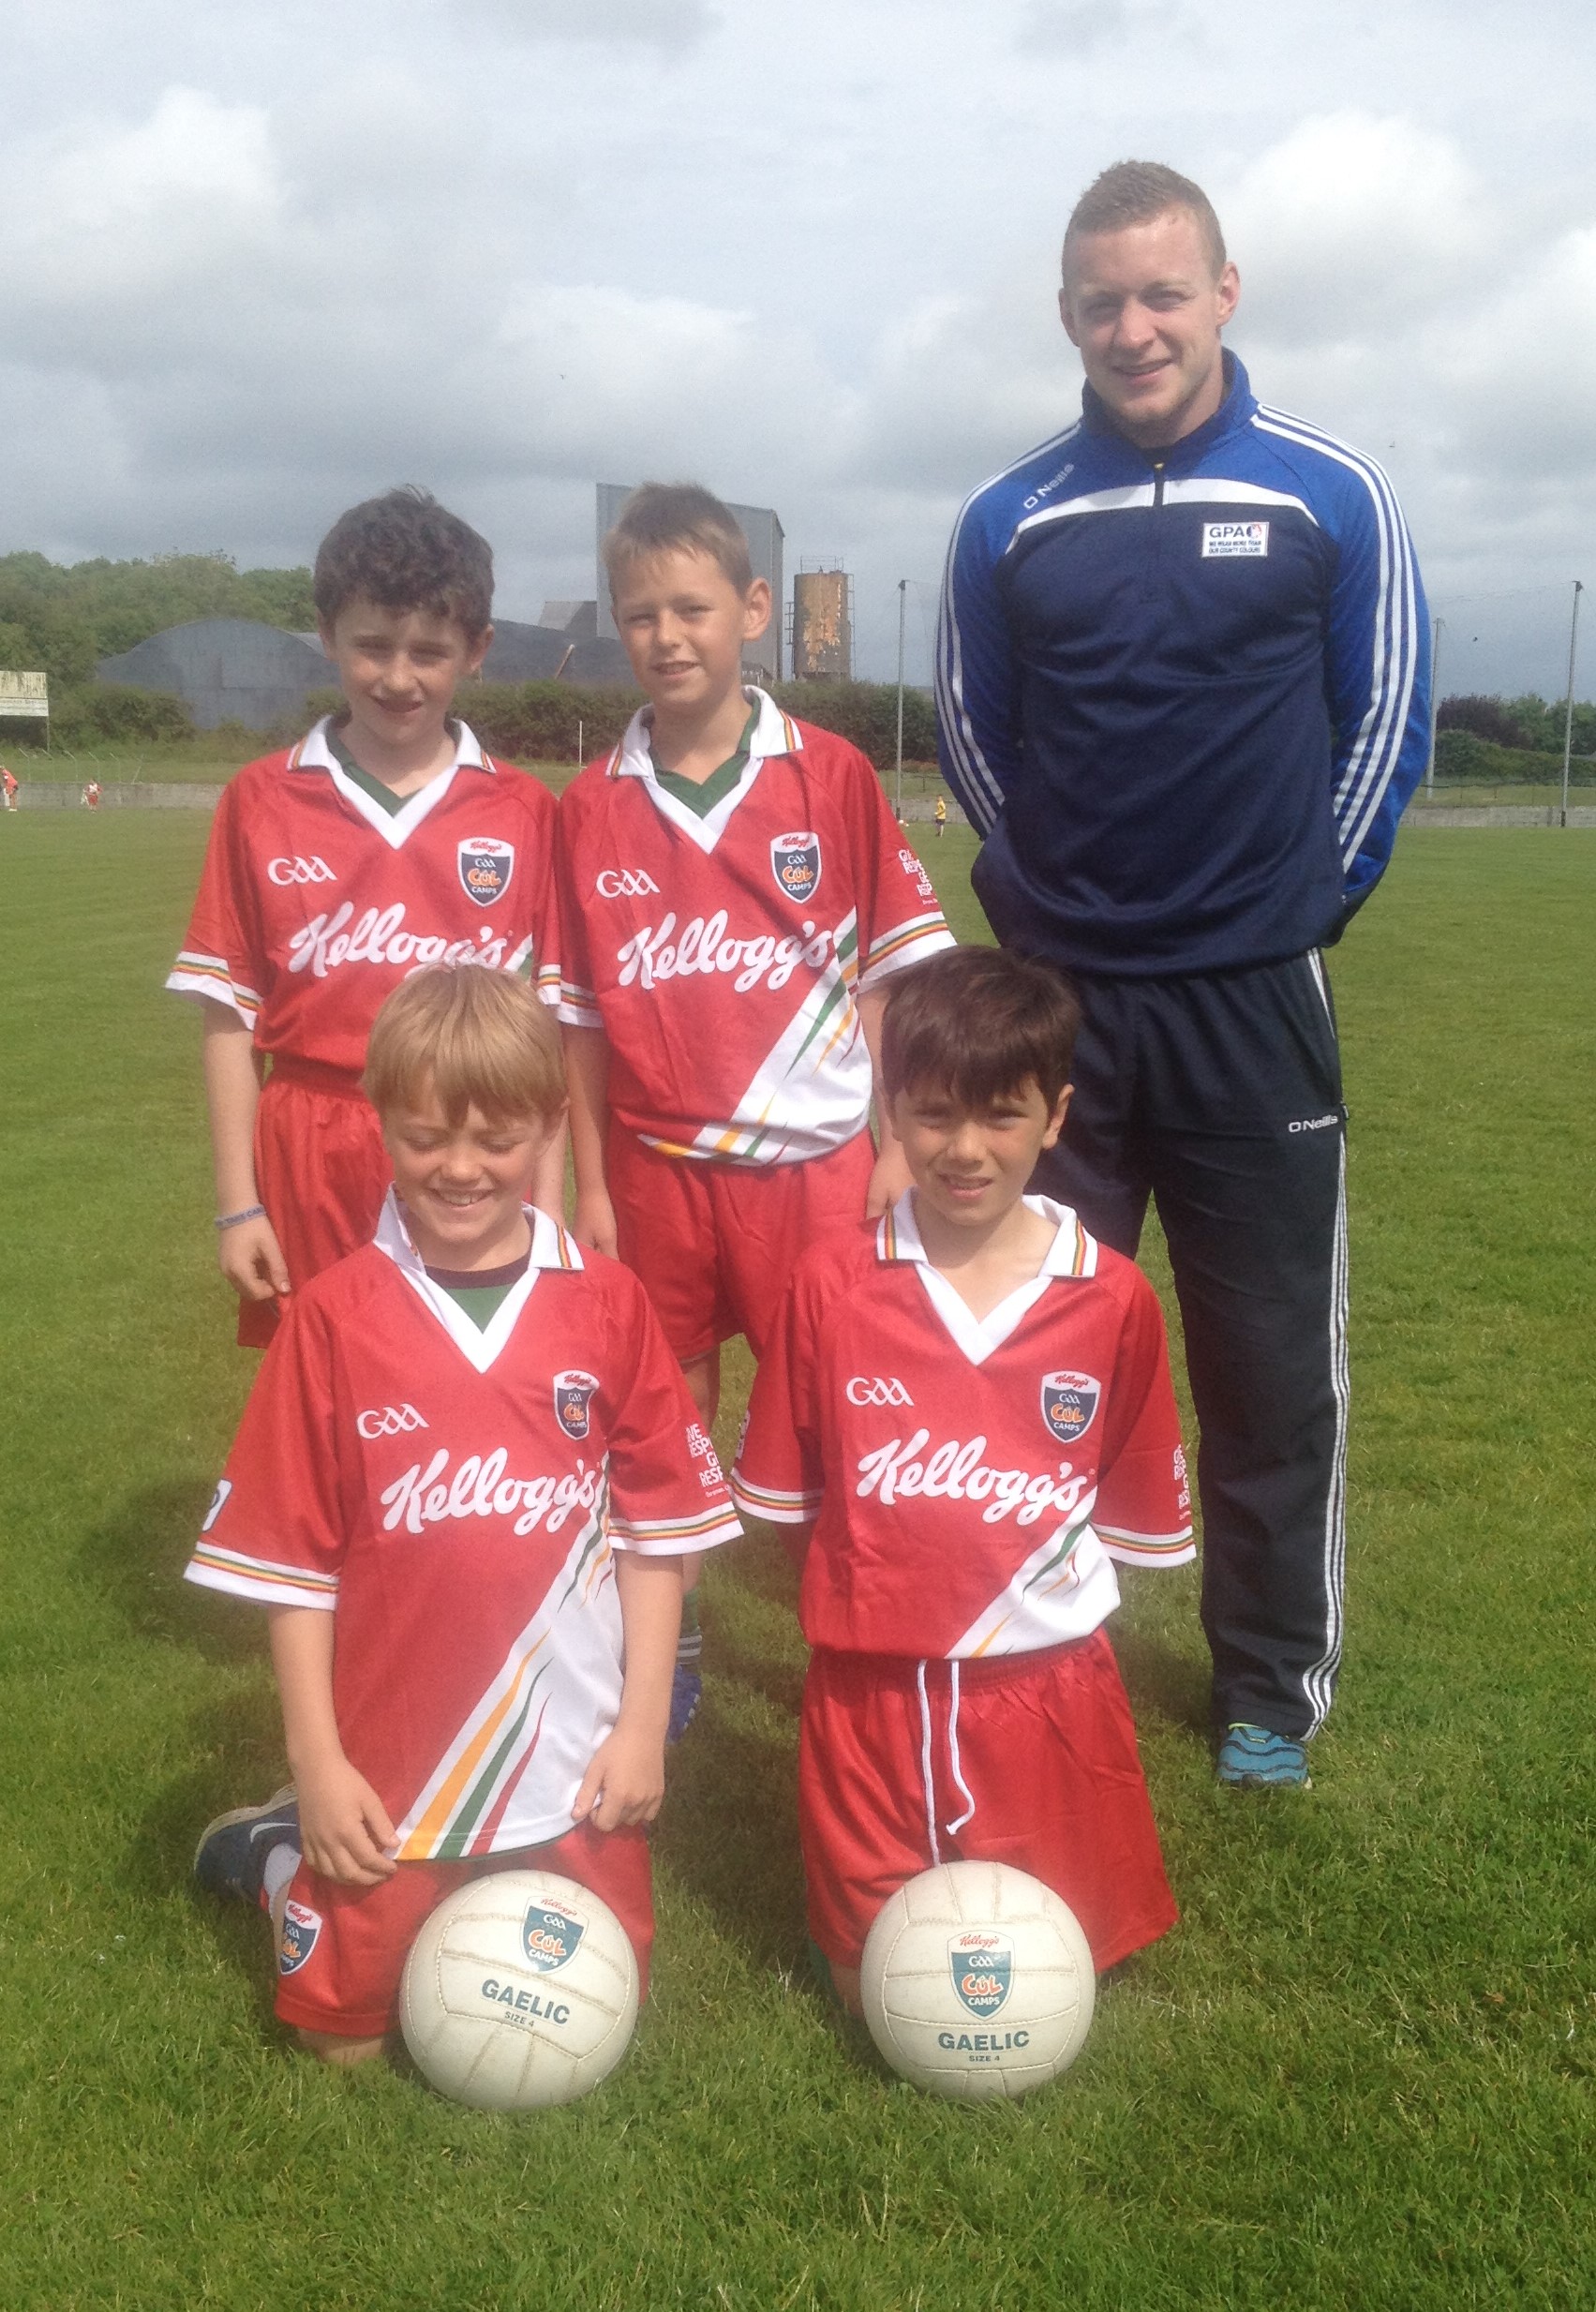 County players visits Cul Camps